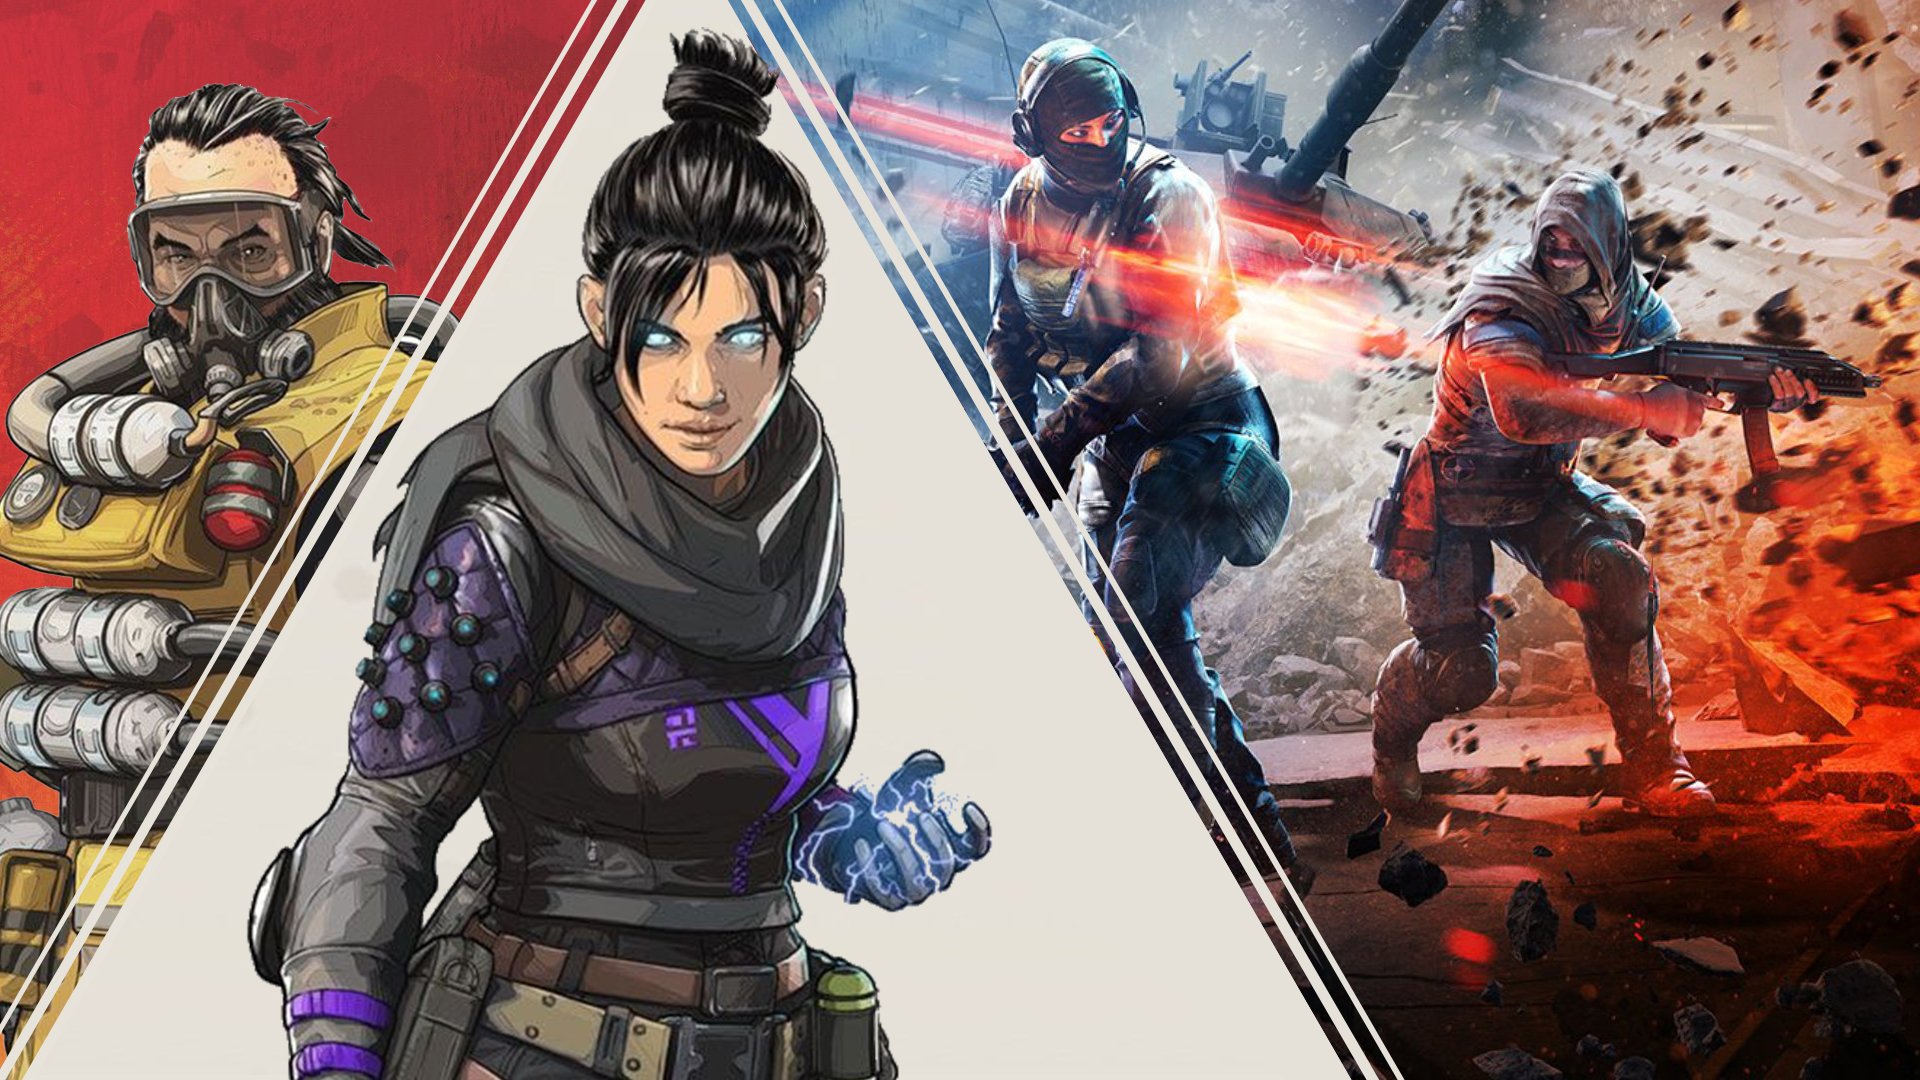 Apex Legends Mobile and upcoming Battlefield Mobile games have